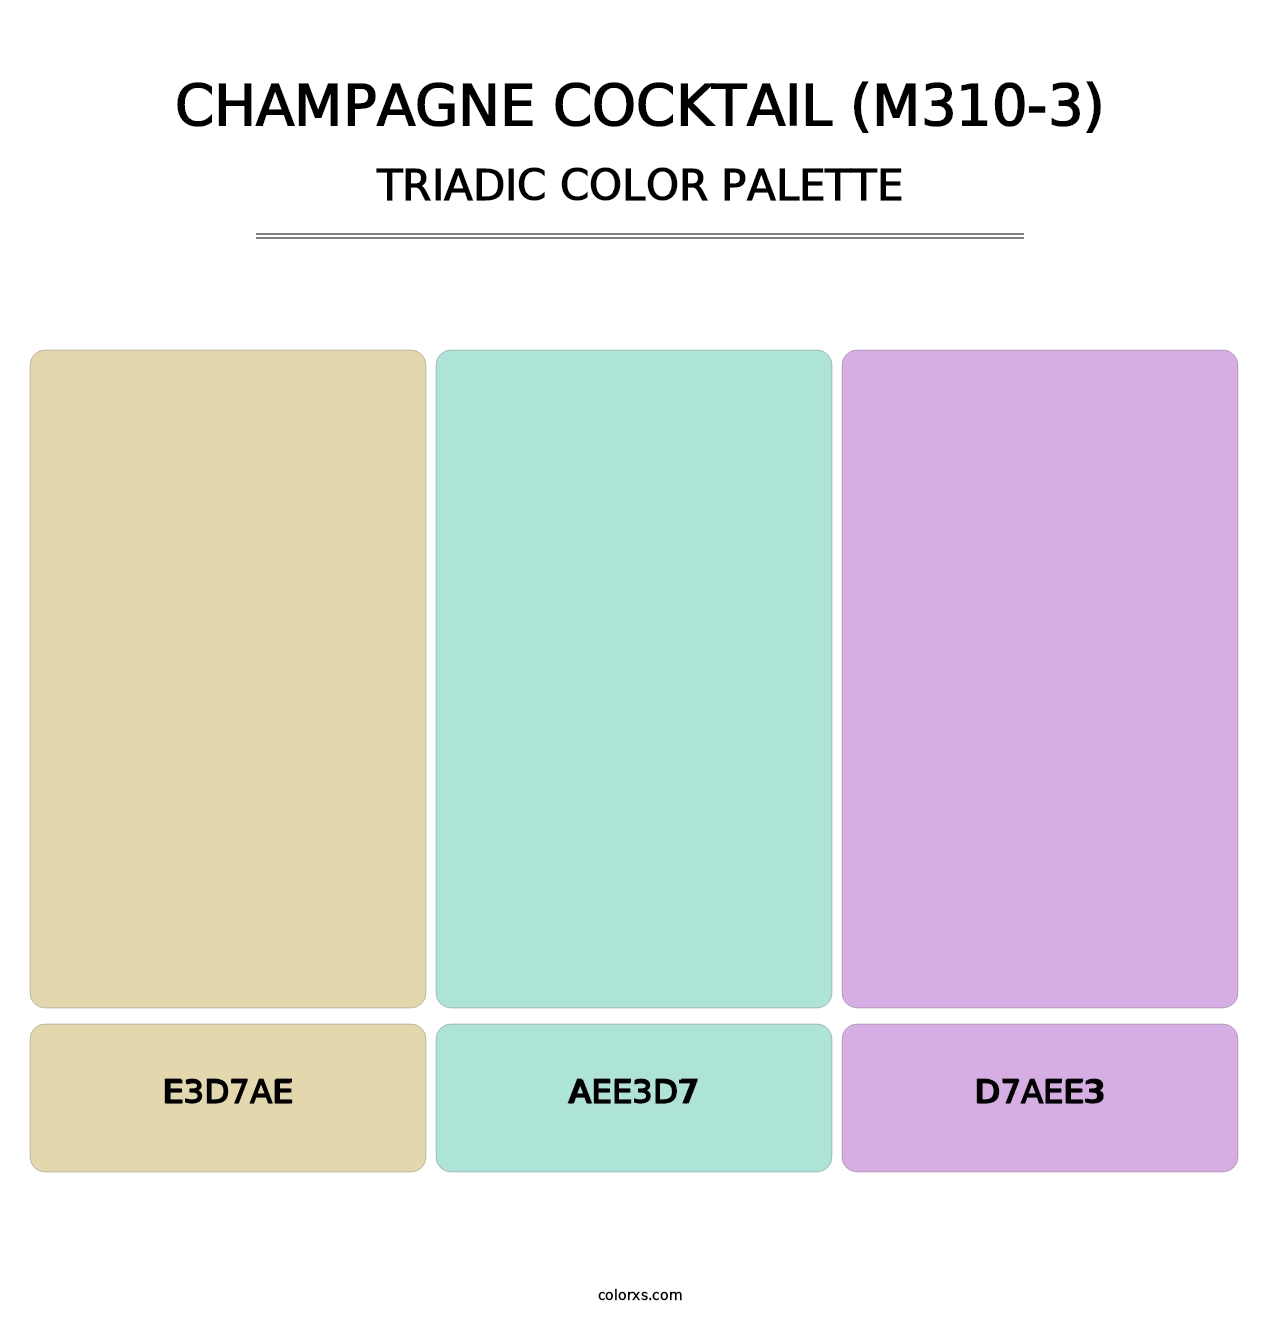 Champagne Cocktail (M310-3) - Triadic Color Palette